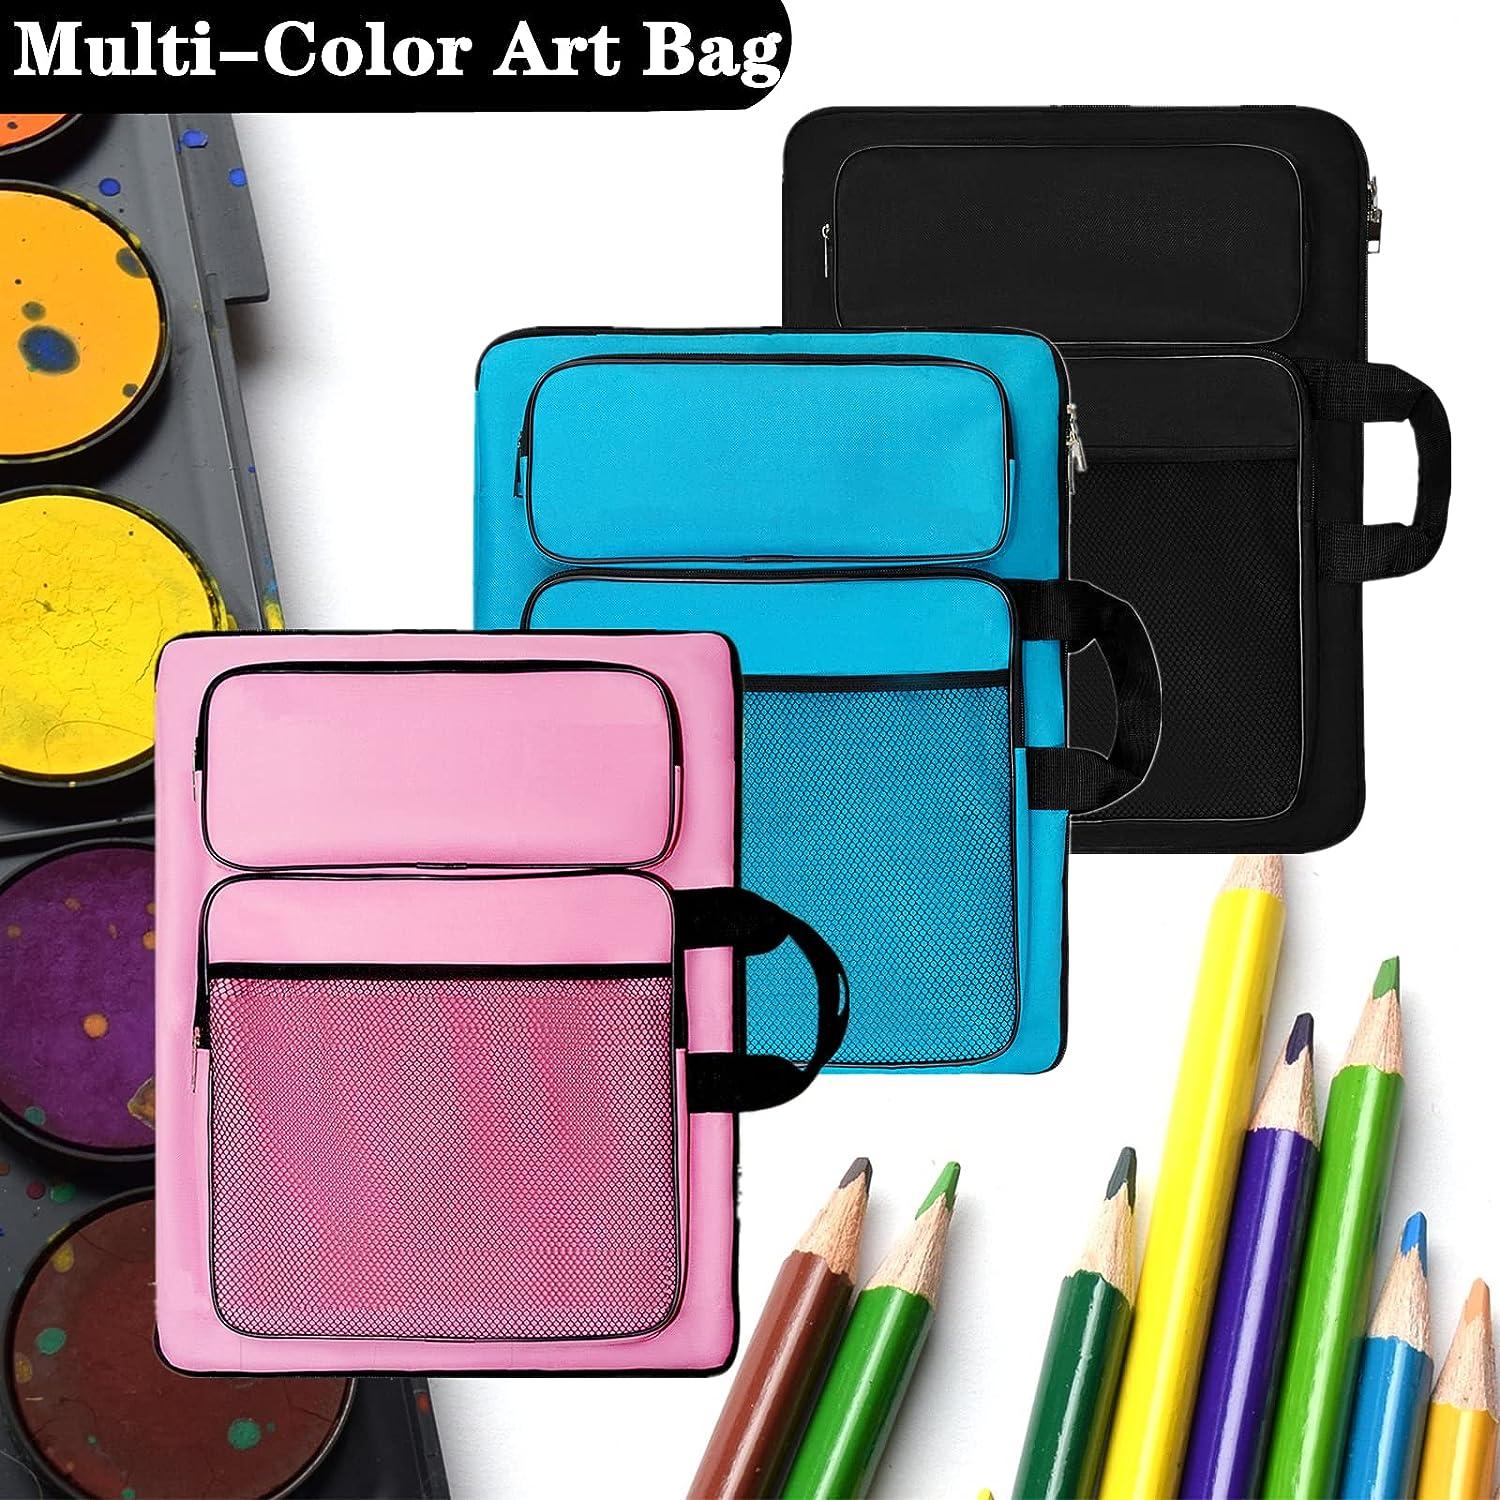 Art Portfolio Case,Art Portfolio Bags Carry Case Art Supplies Tote,  Backpack Bag with Pockets Handle Organizer,Student Carrying Storage Bag  Artwork Poster Board,Project Drawing Pink 